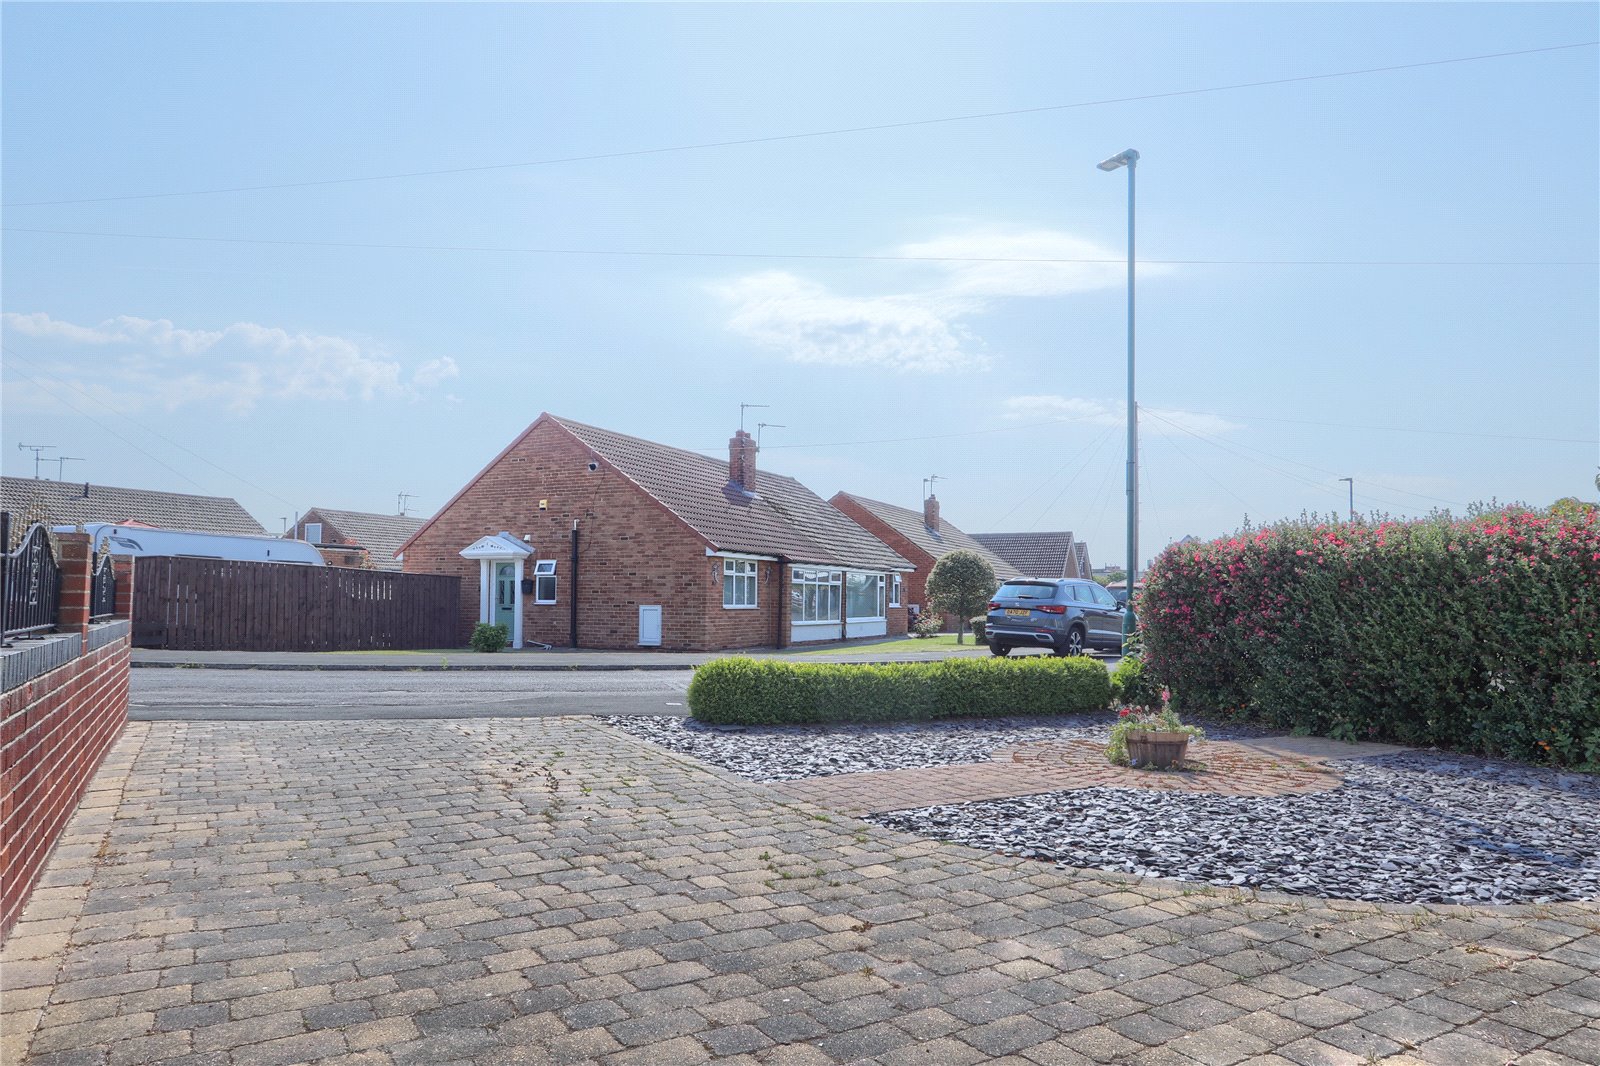 2 bed bungalow for sale in Falklands Close, Marske-by-the-Sea 1